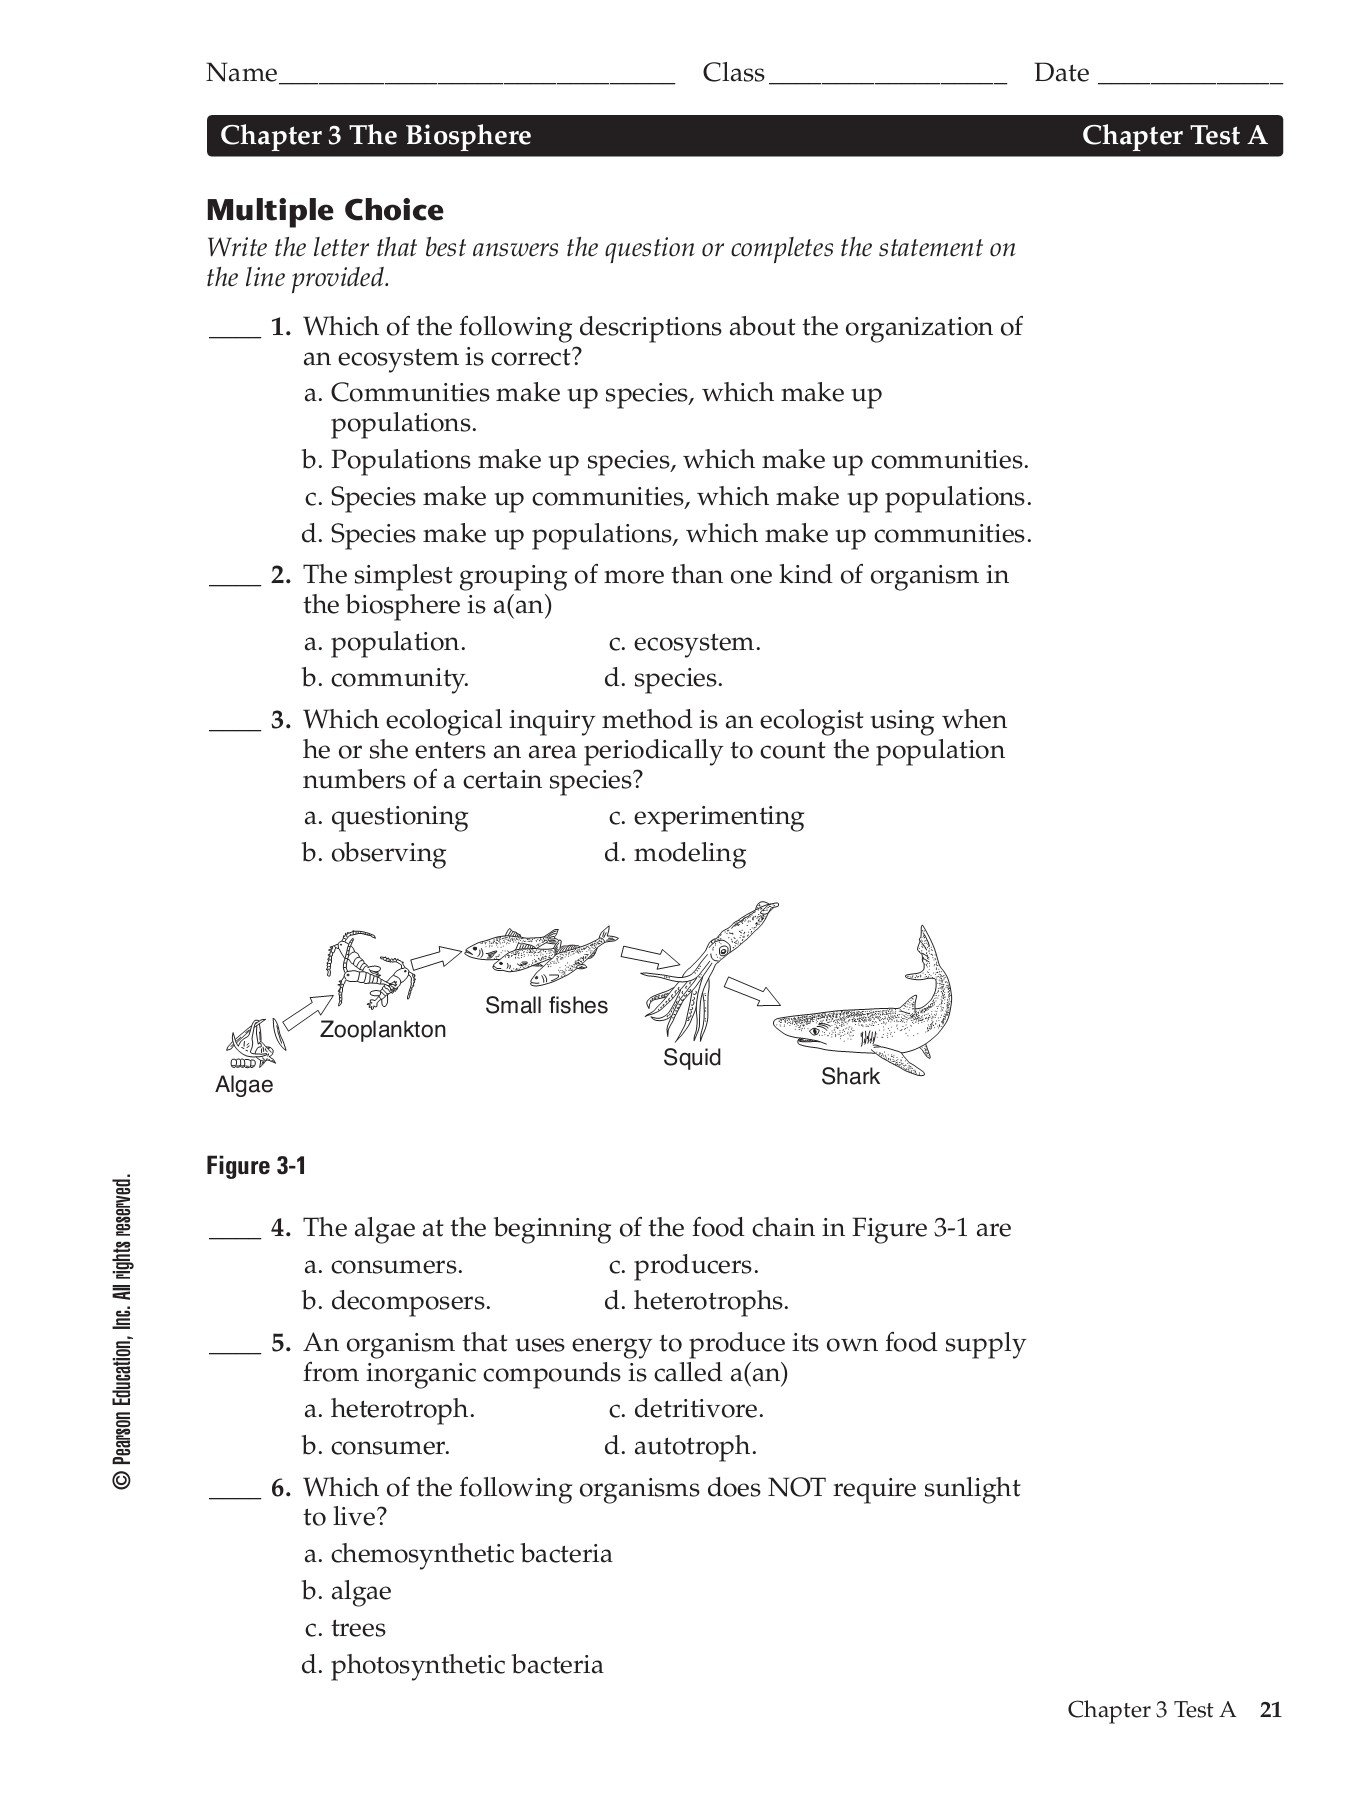 Chapter 3 The Biosphere Test A  Dibiasioscience For Chapter 6 Humans In The Biosphere Worksheet Answers